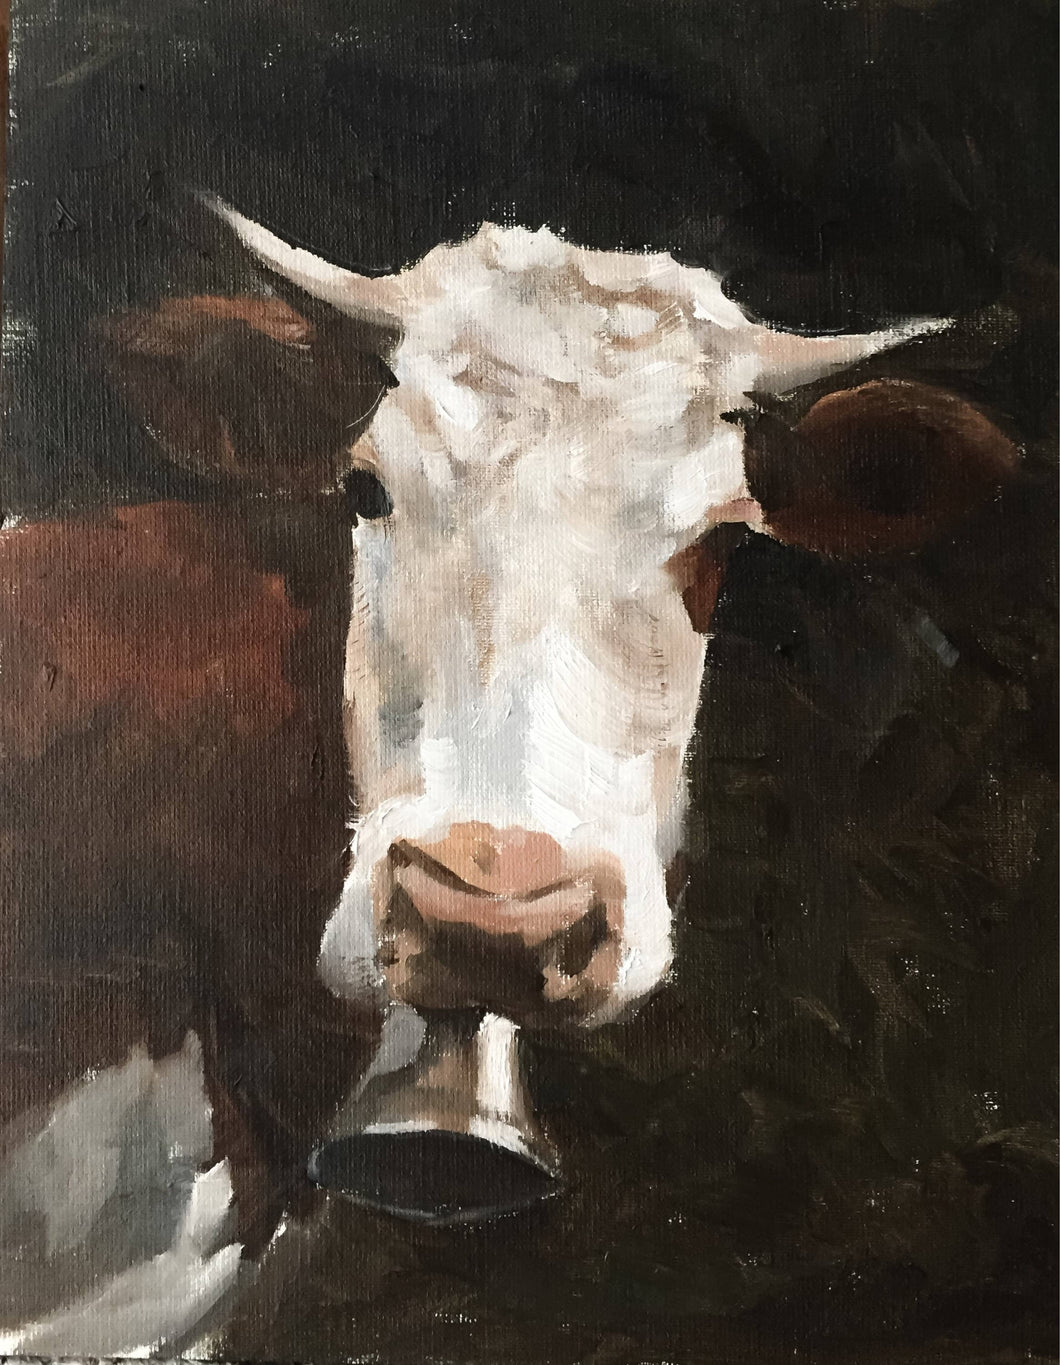 Brown and white Cow Painting, Print, Canvas, Poster, Original, Commissions - Fine Art - from original oil painting by James Coates